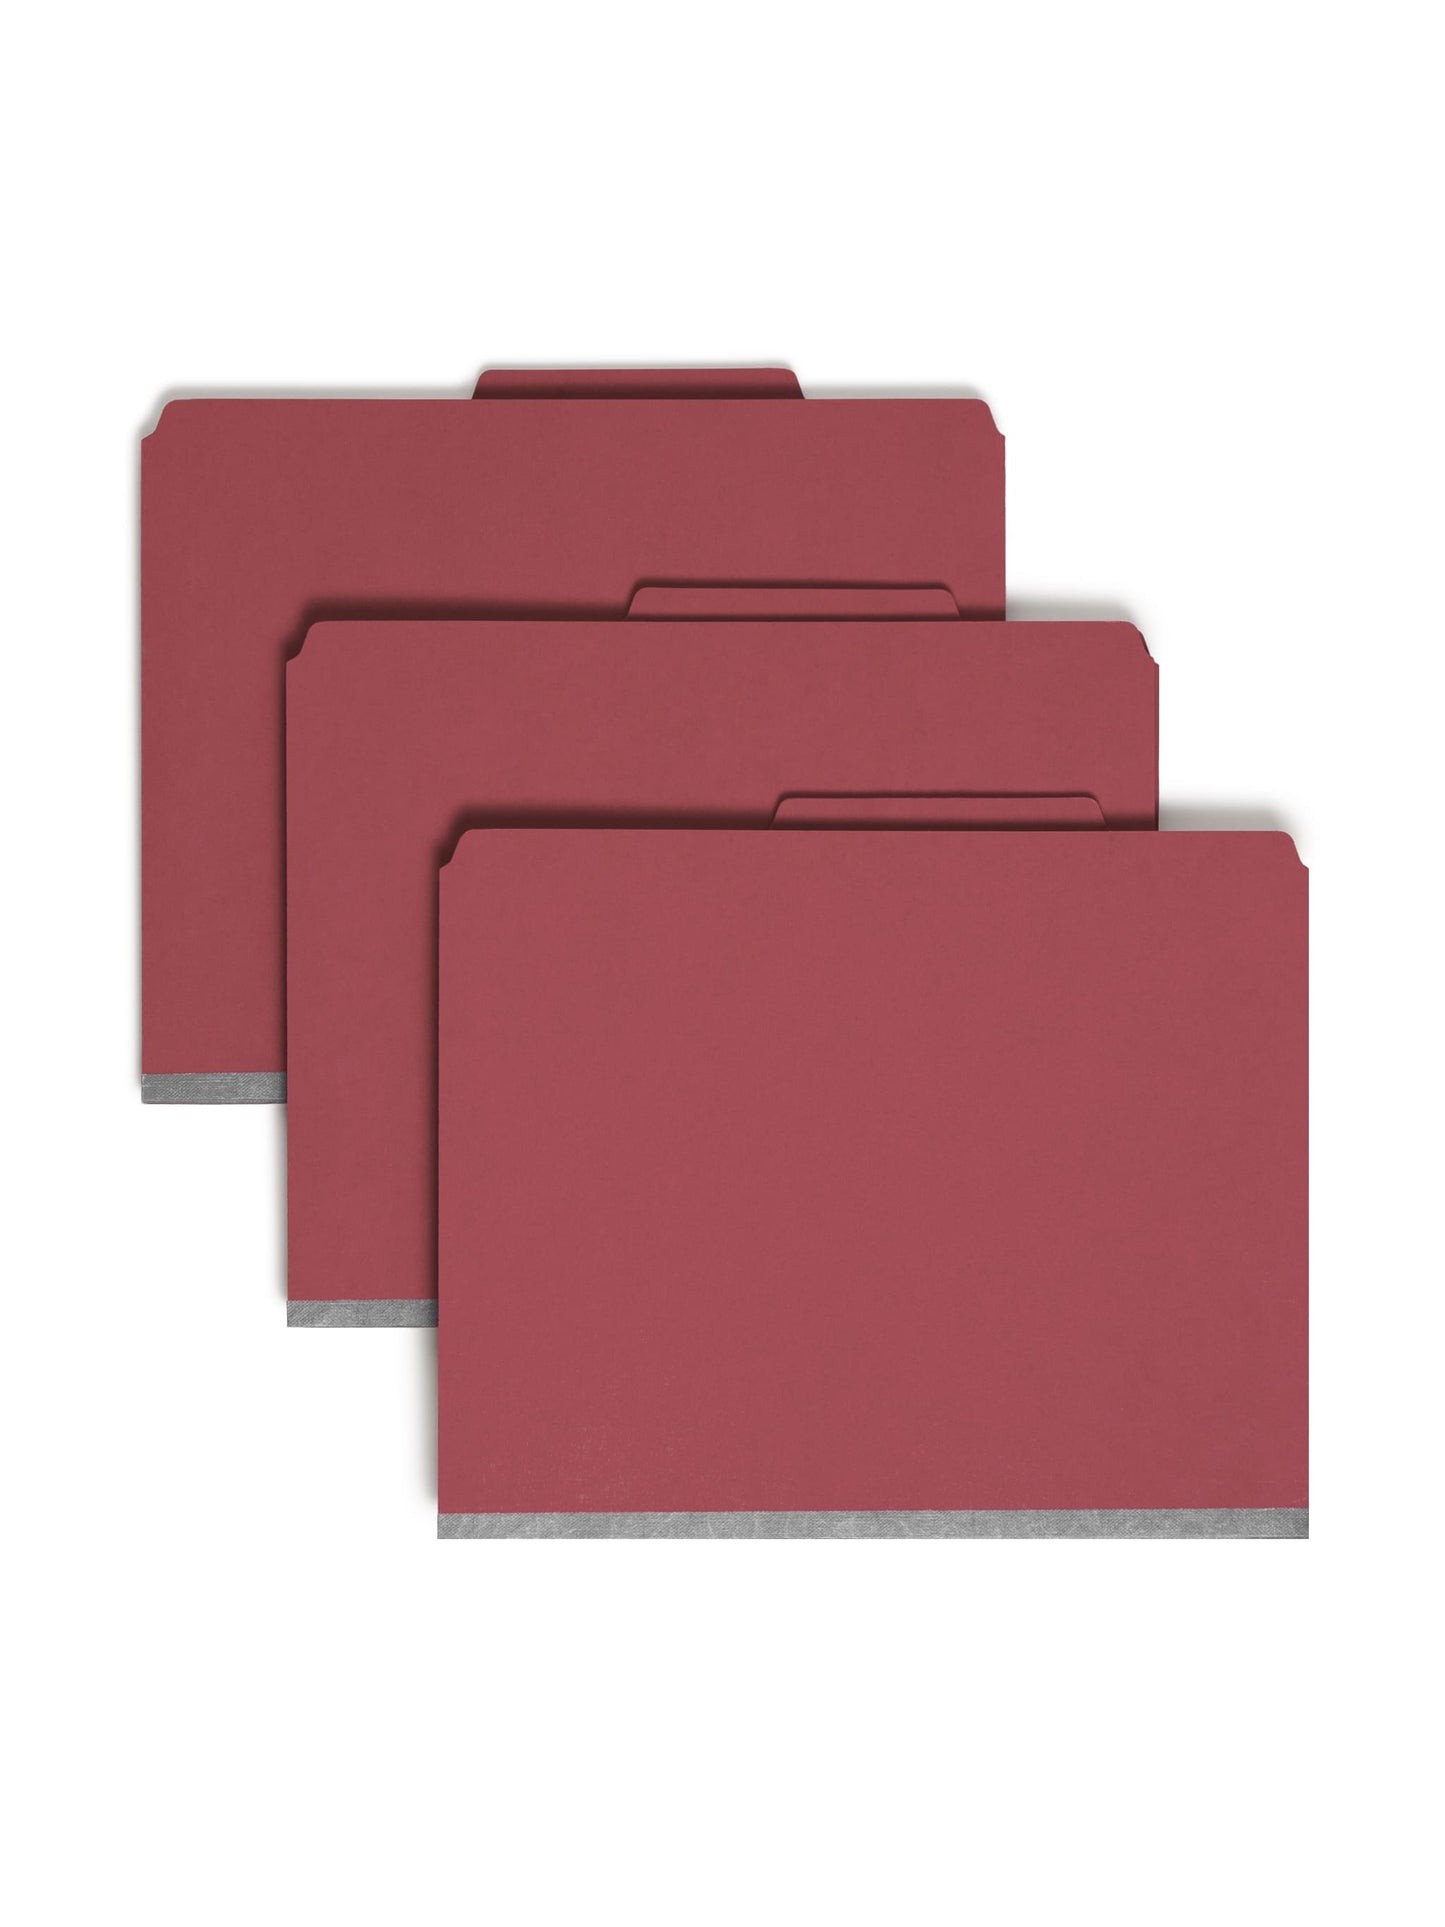 SafeSHIELD® Pressboard Classification File Folders, 2 Dividers, 2 inch Expansion, 2/5-Cut Tab, Bright Red  Color, Letter Size, Set of 0, 30086486140318